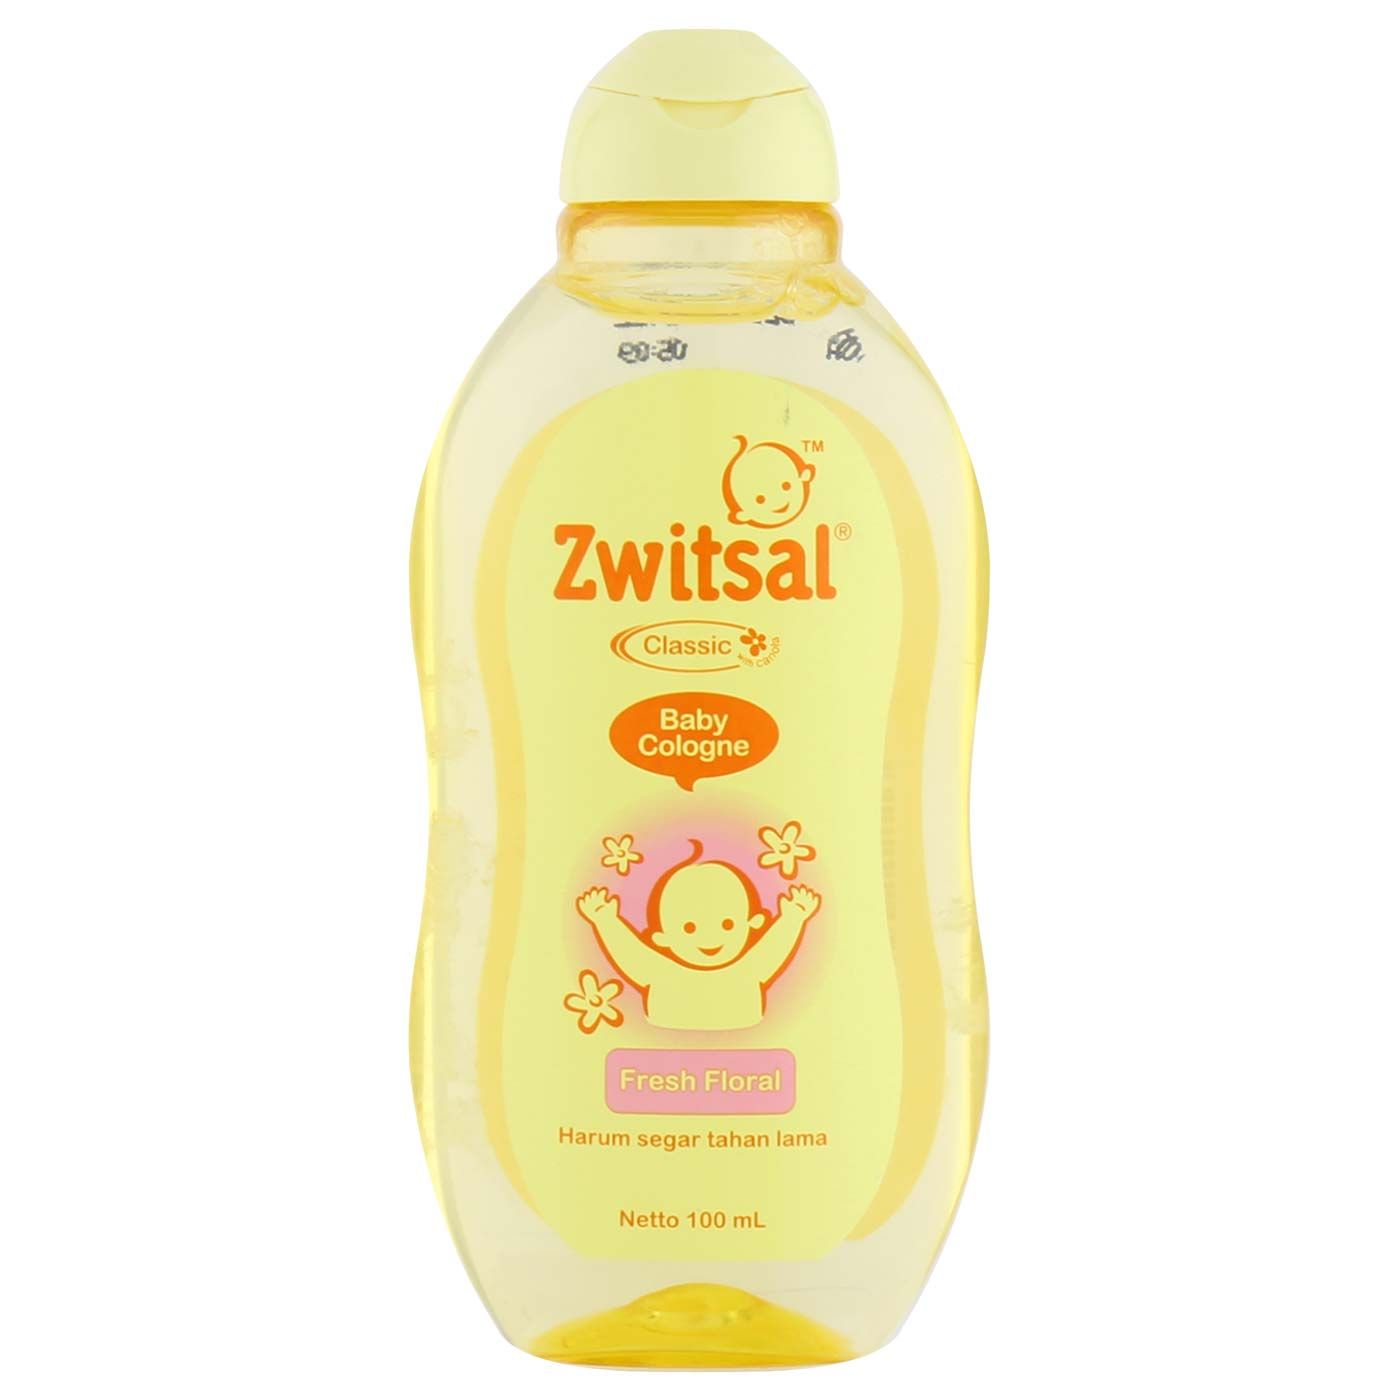 Zwitsal Baby Cologne New Fresh Floral 100ml - 1